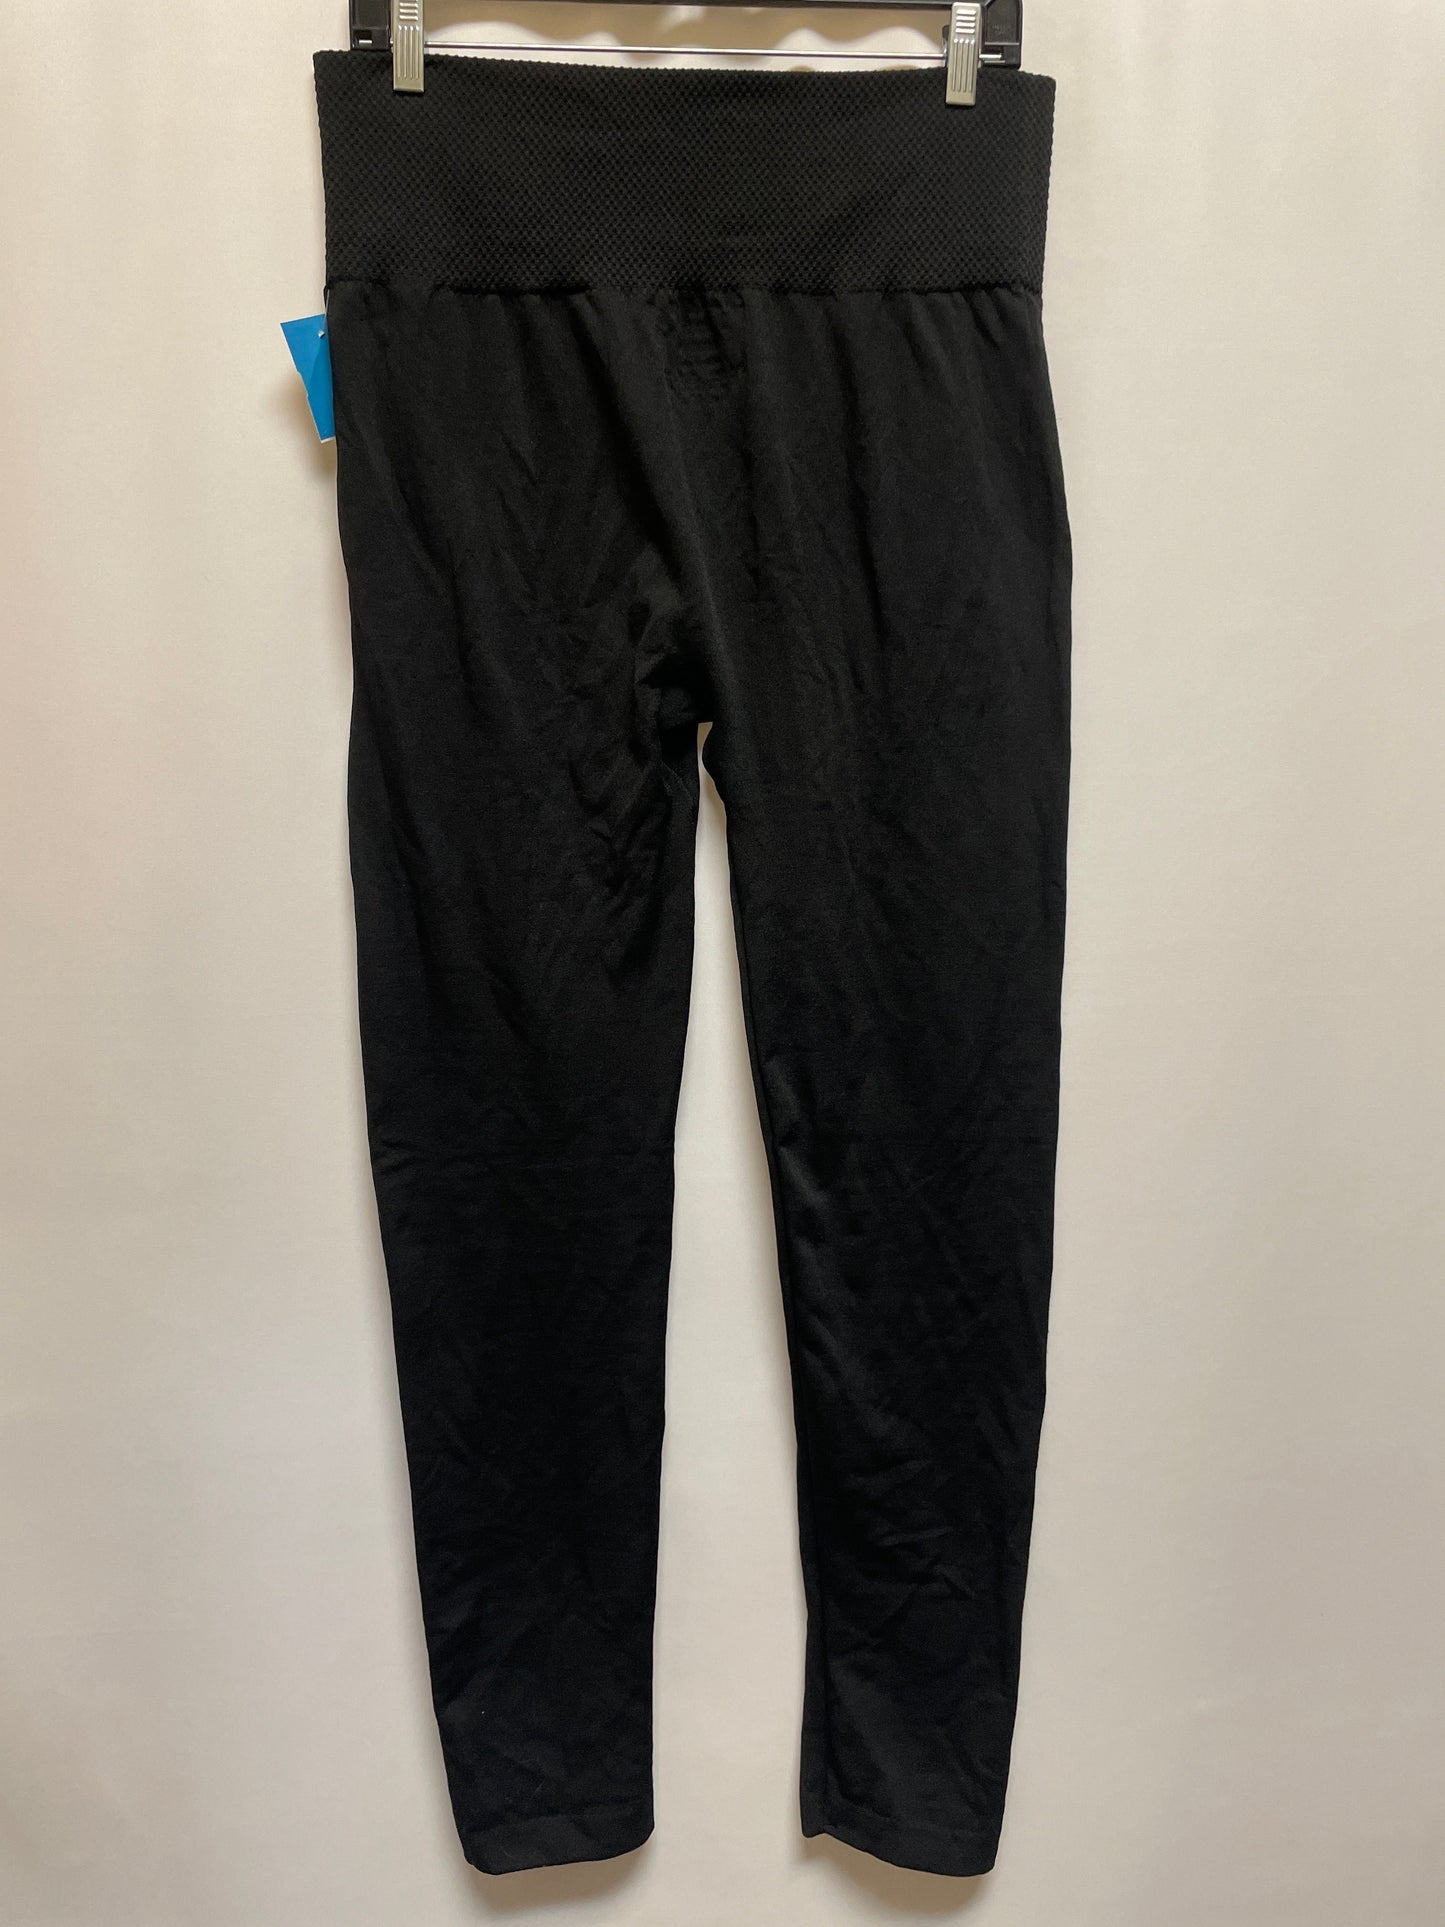 Leggings By Clothes Mentor  Size: 2x